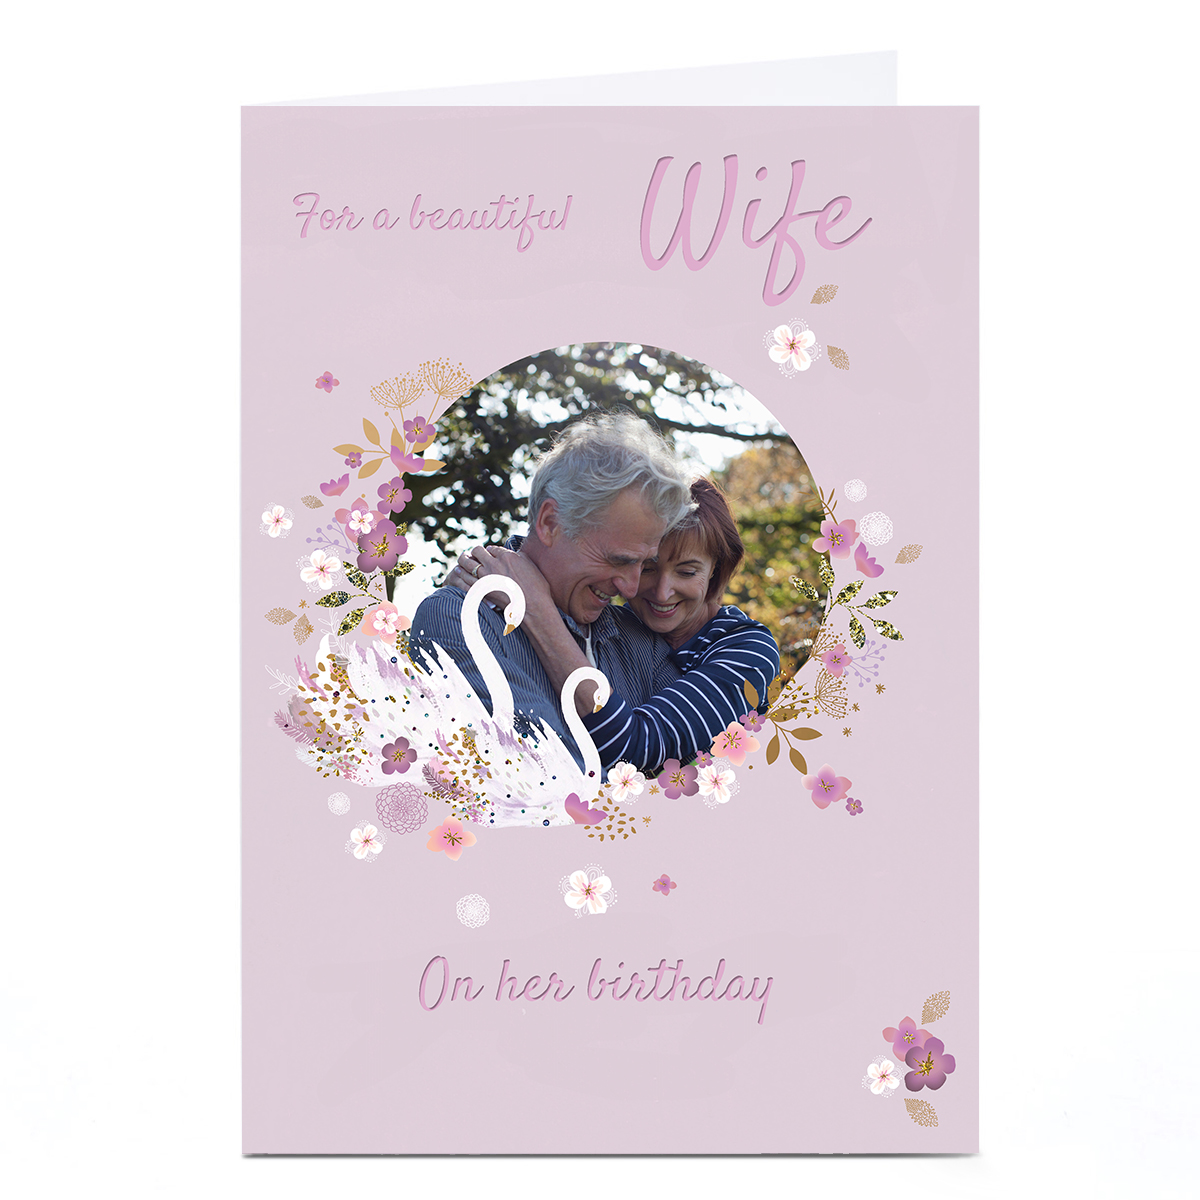 Personalised Kerry Spurling Photo Card - Beautiful Wife